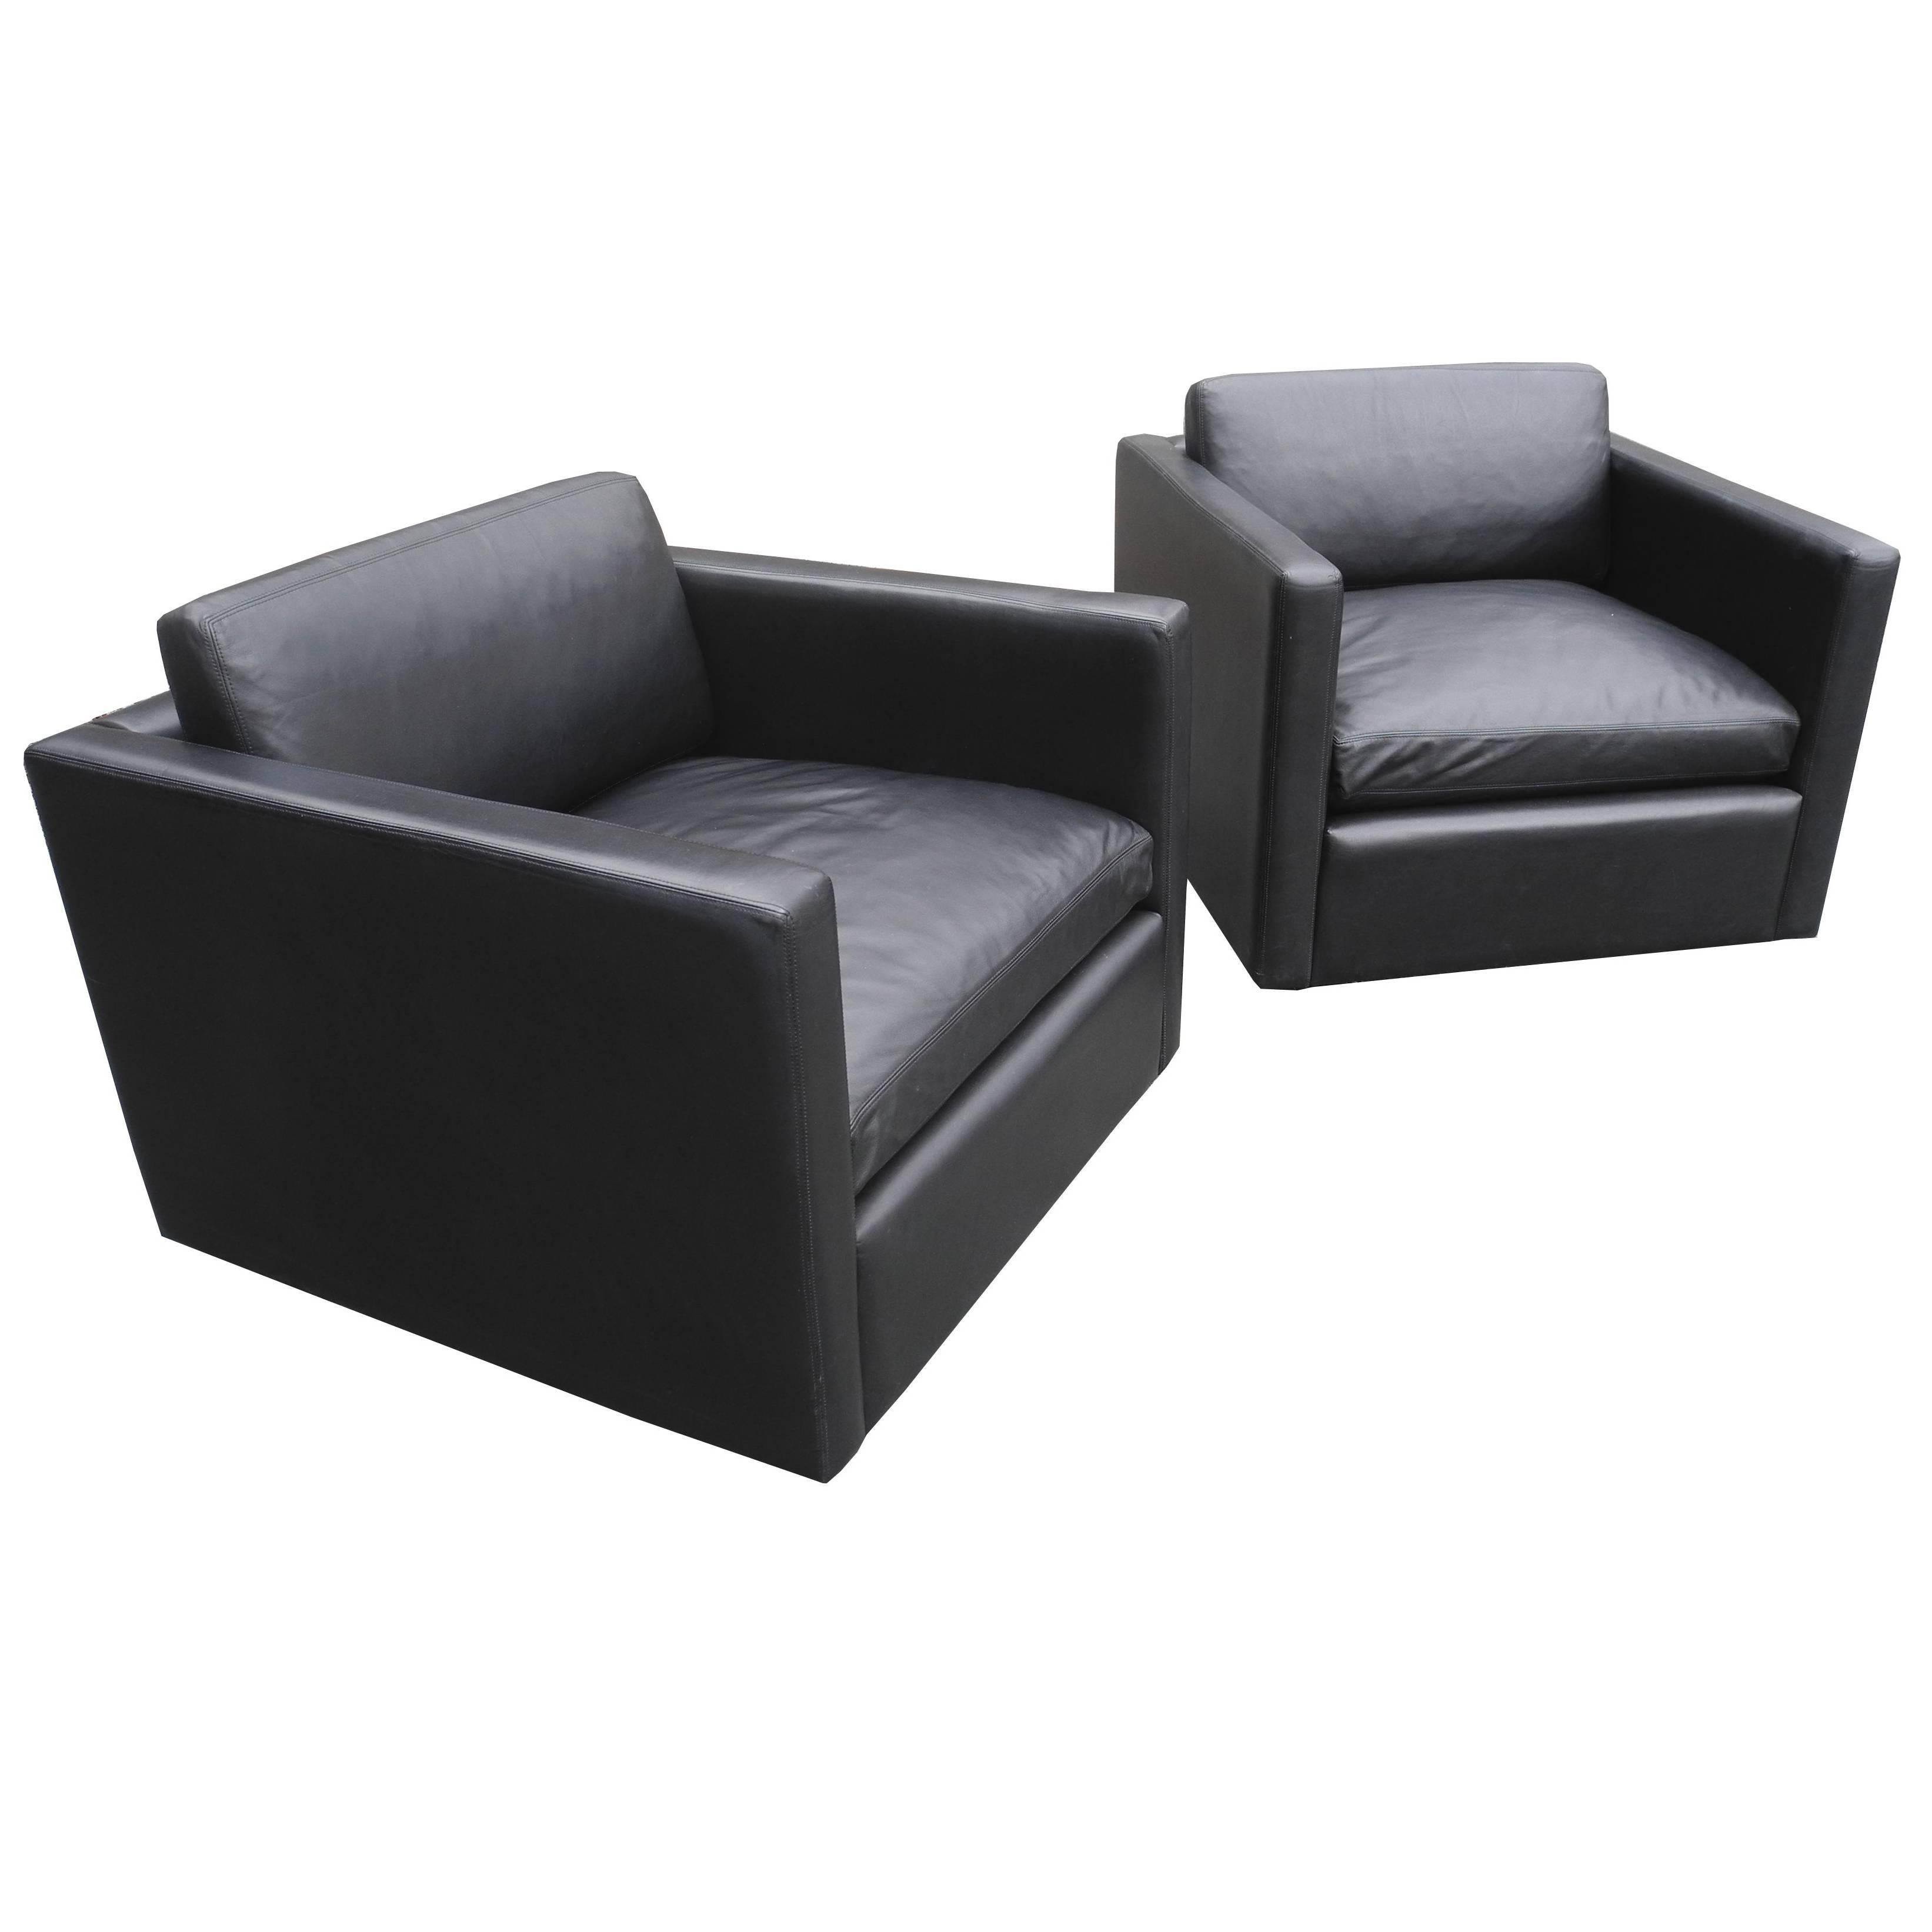 Pair of Charles Pfister "Lounge Collection, 1971" in Black Leather for Knoll For Sale